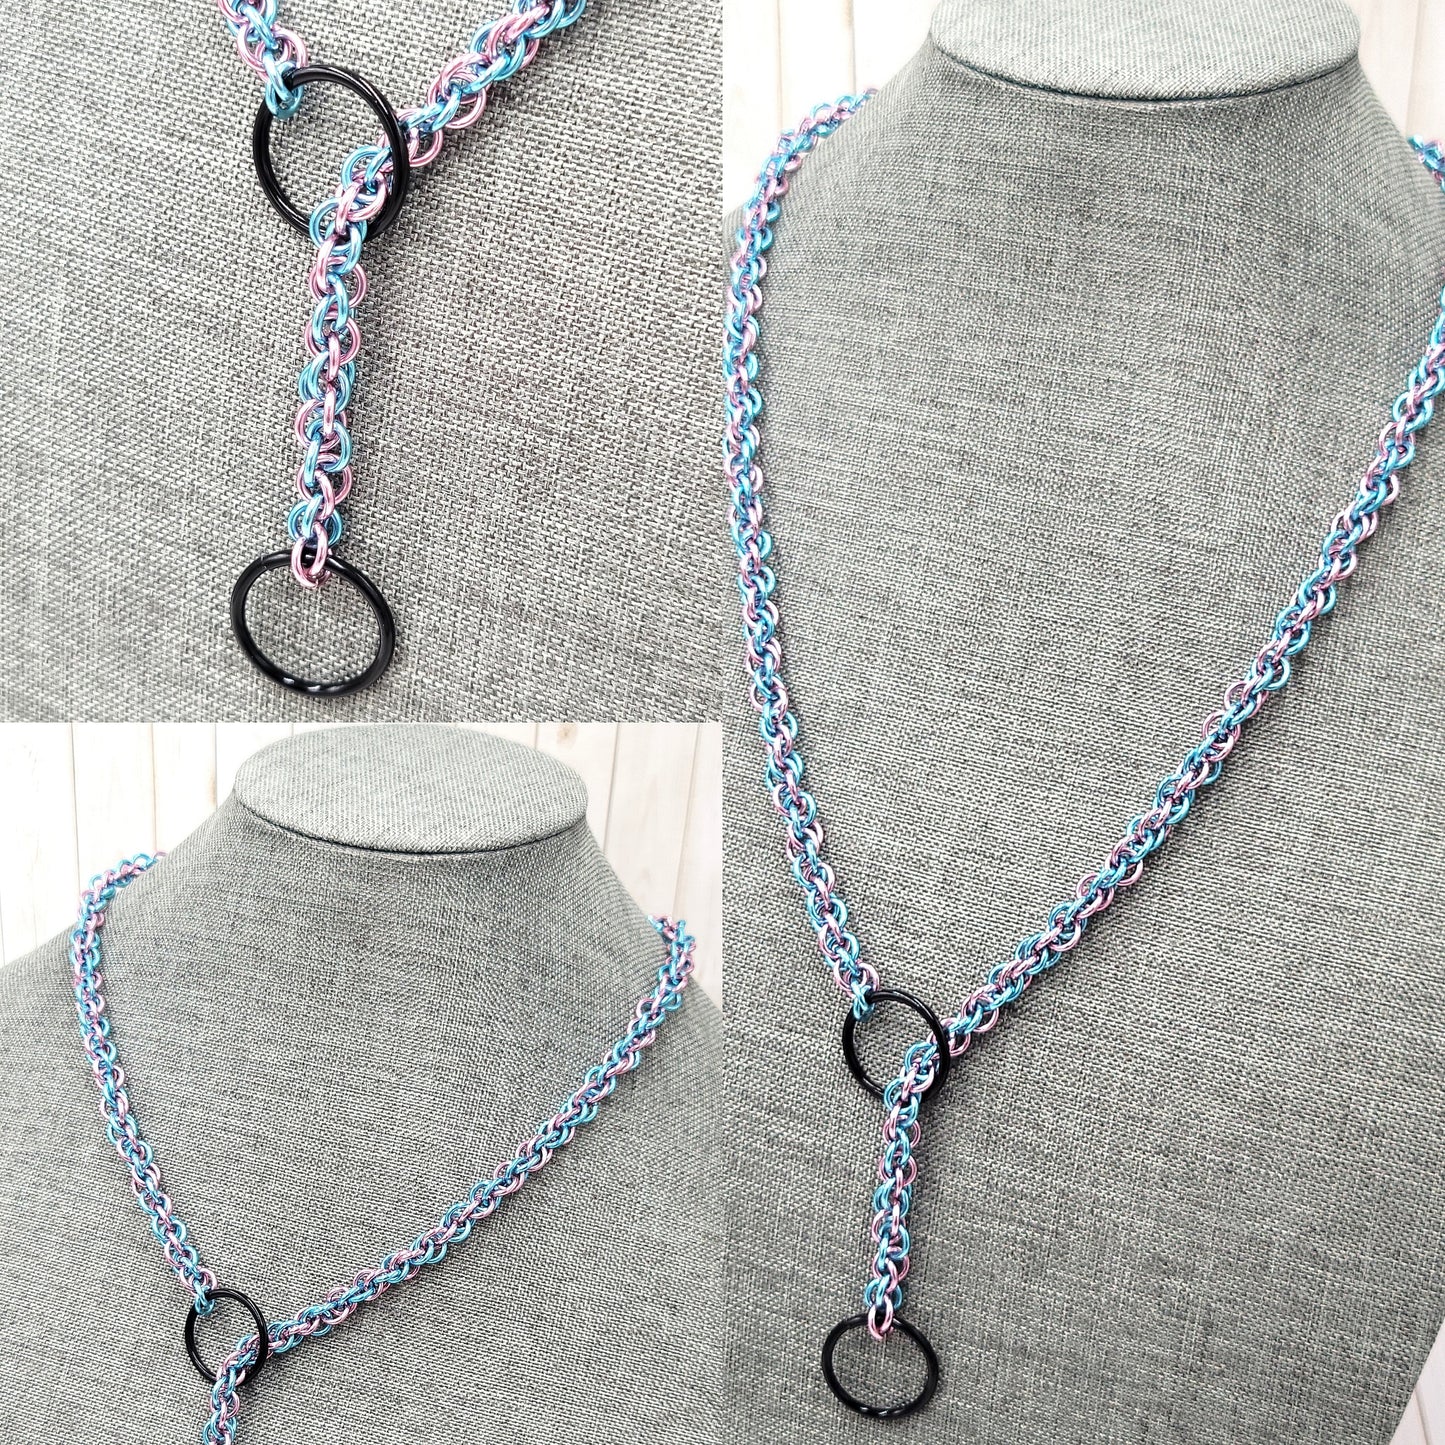 Light Blue and Light Pink with Black Lariat "Choke" Chain